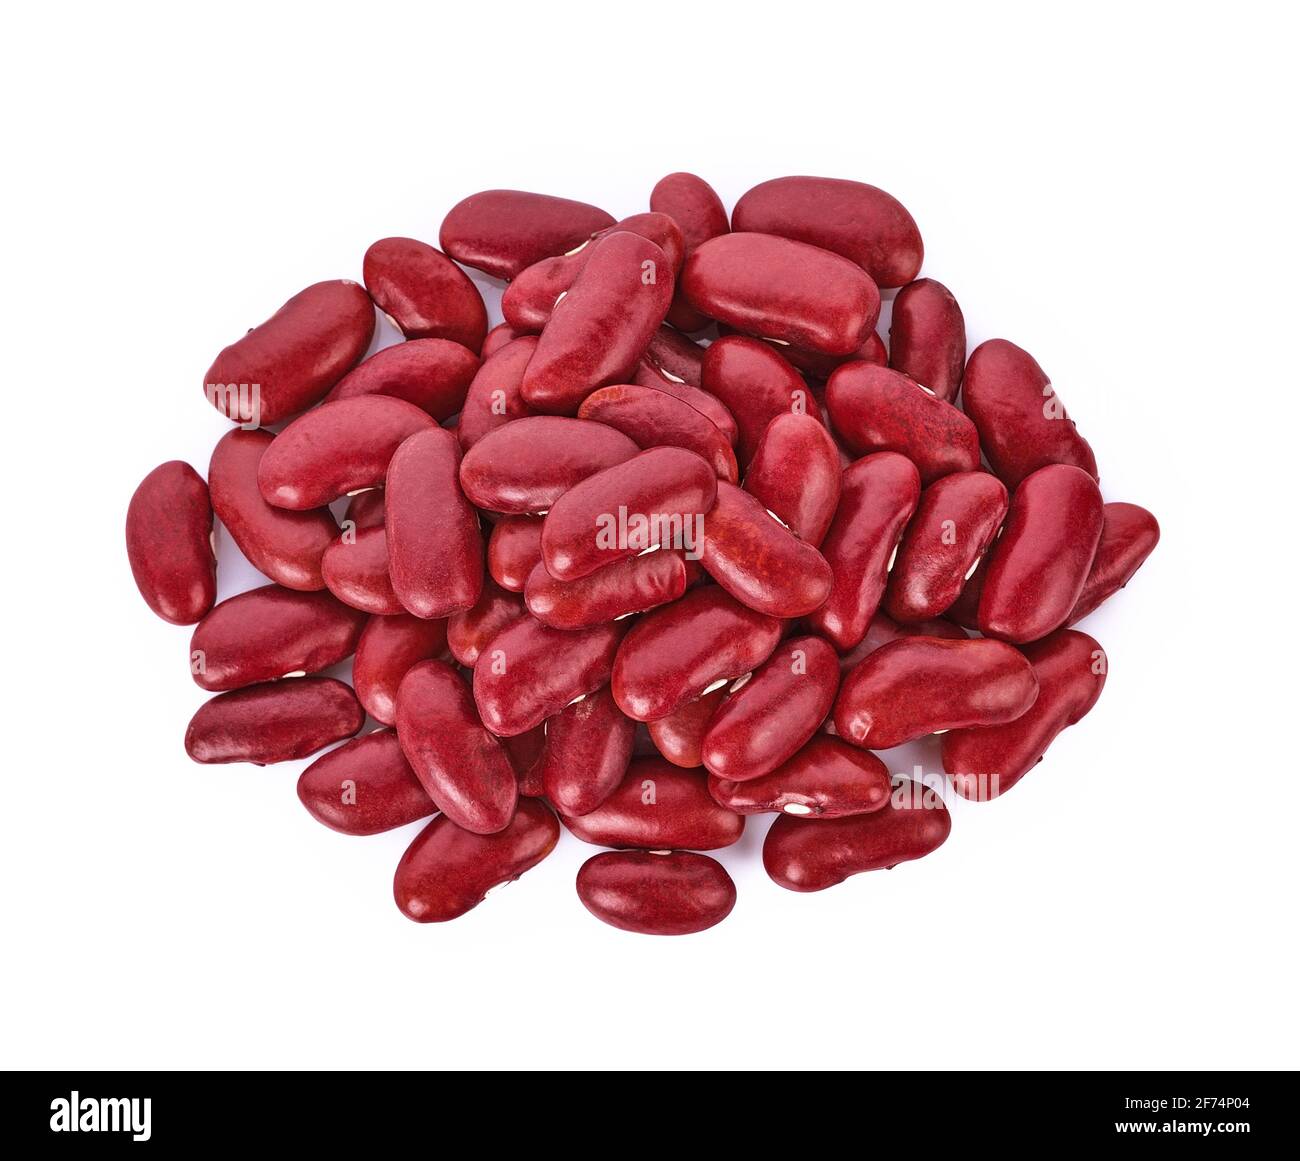 red kidney bean isolated on white background Stock Photo